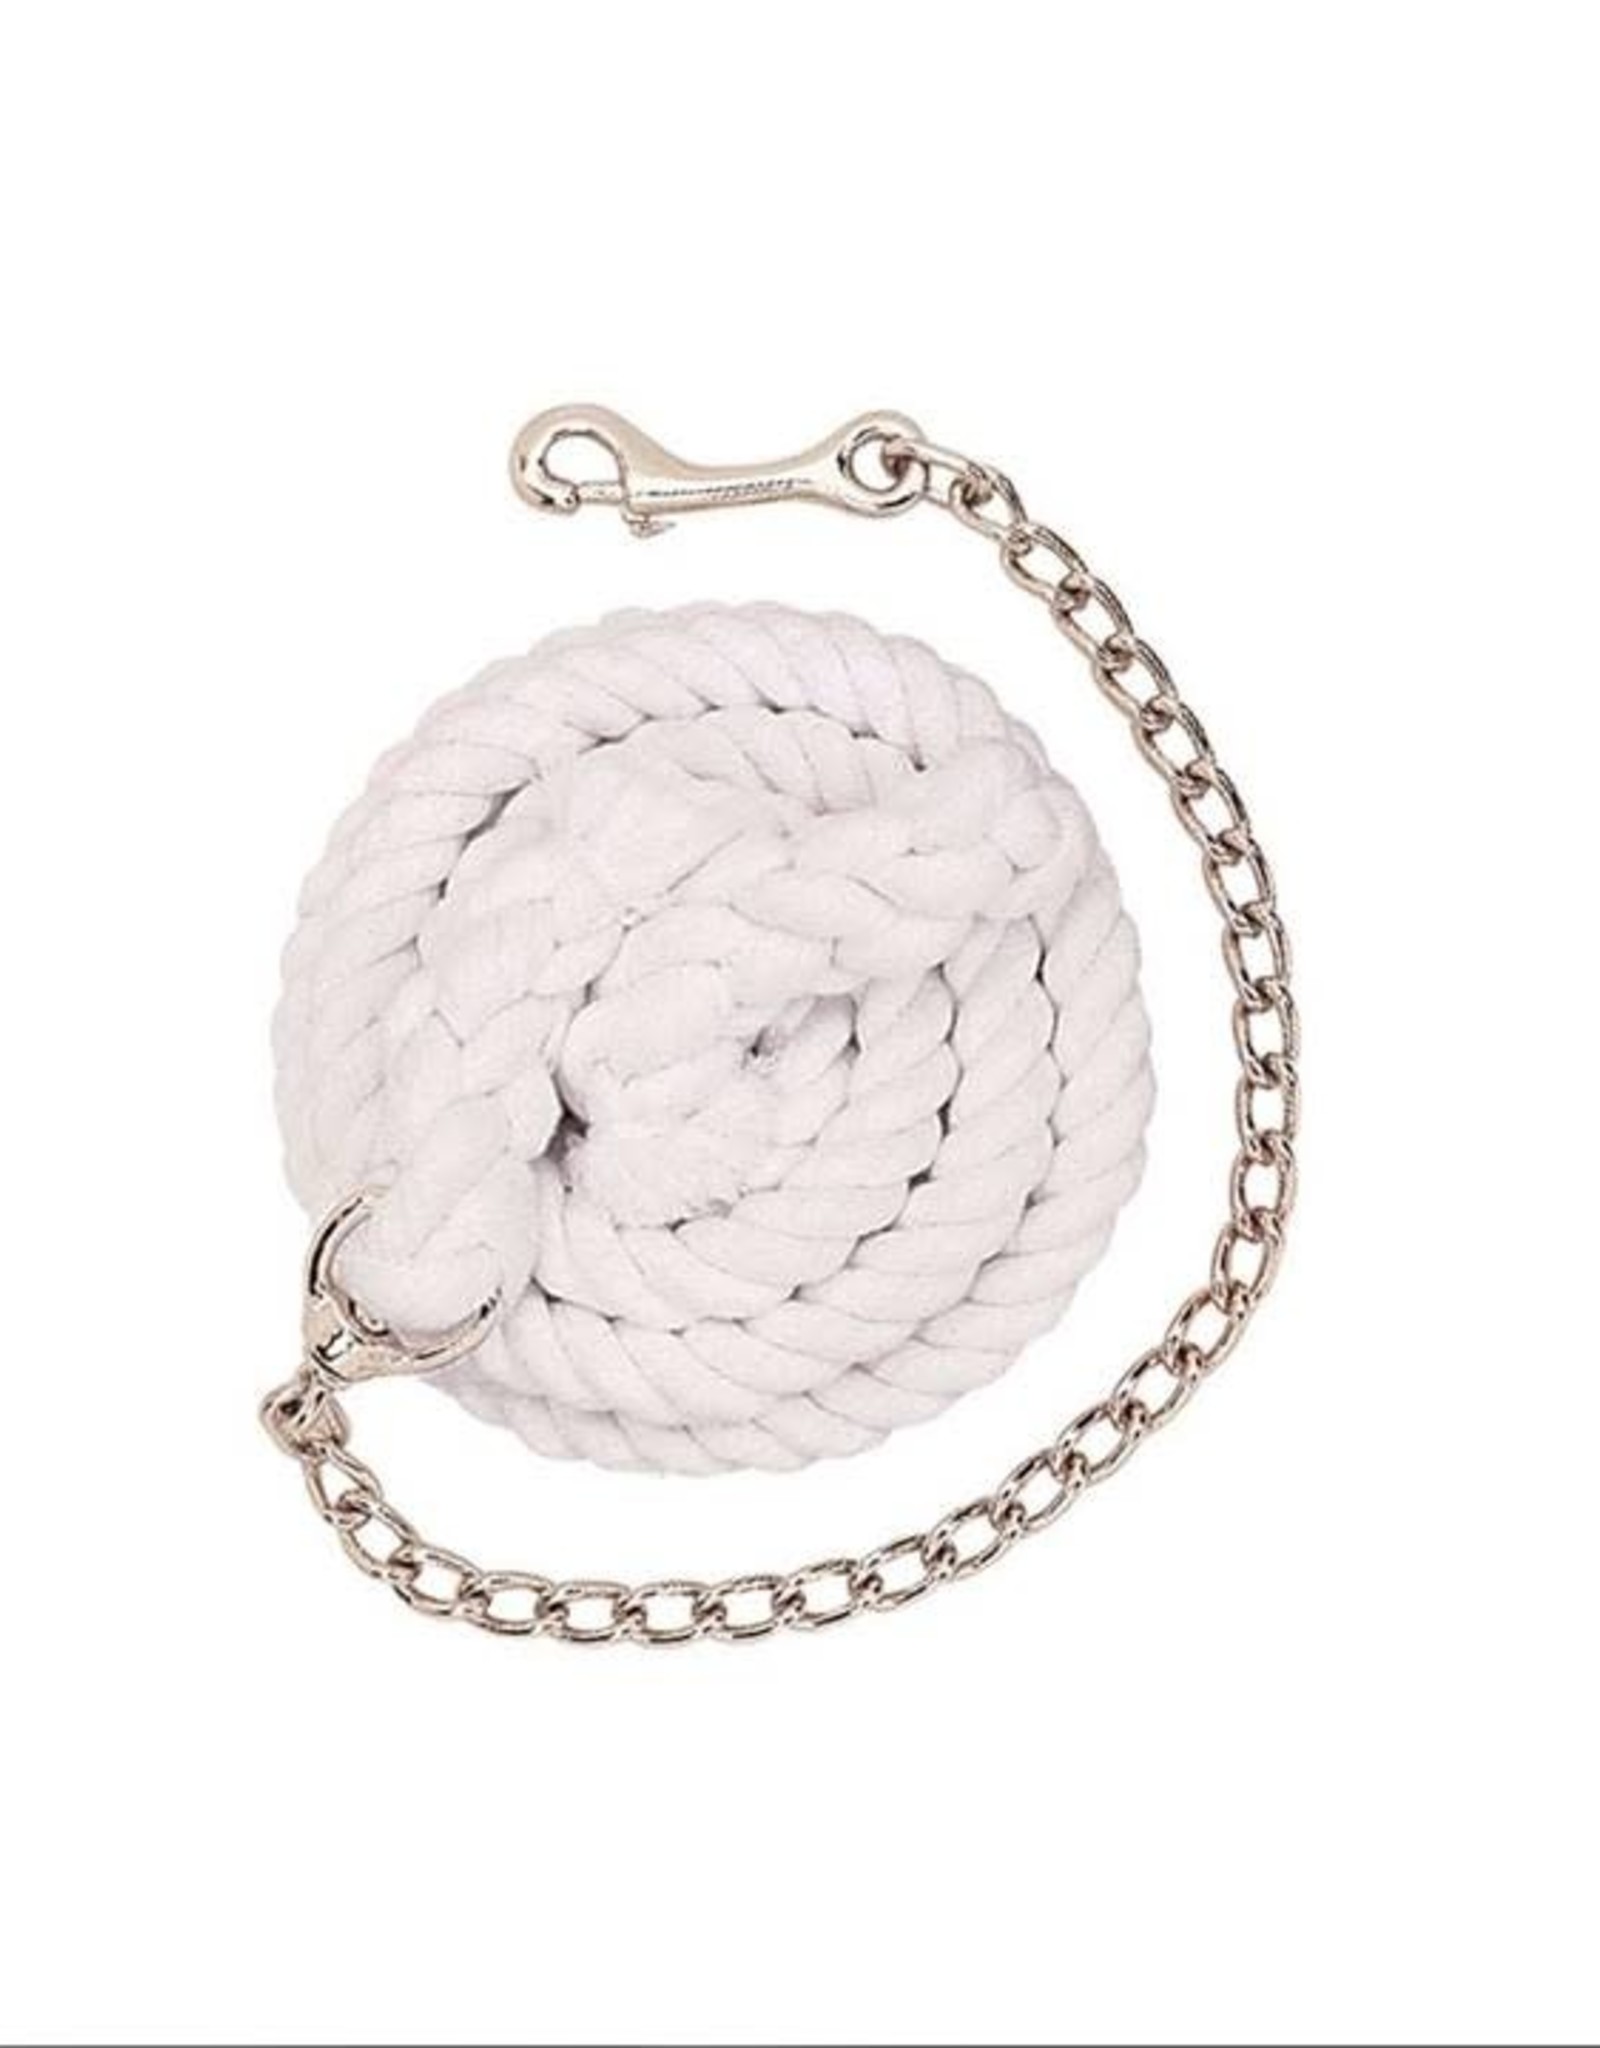 Weaver Leather White Cotton Lead Rope with Nickel Plated Chain and Snap